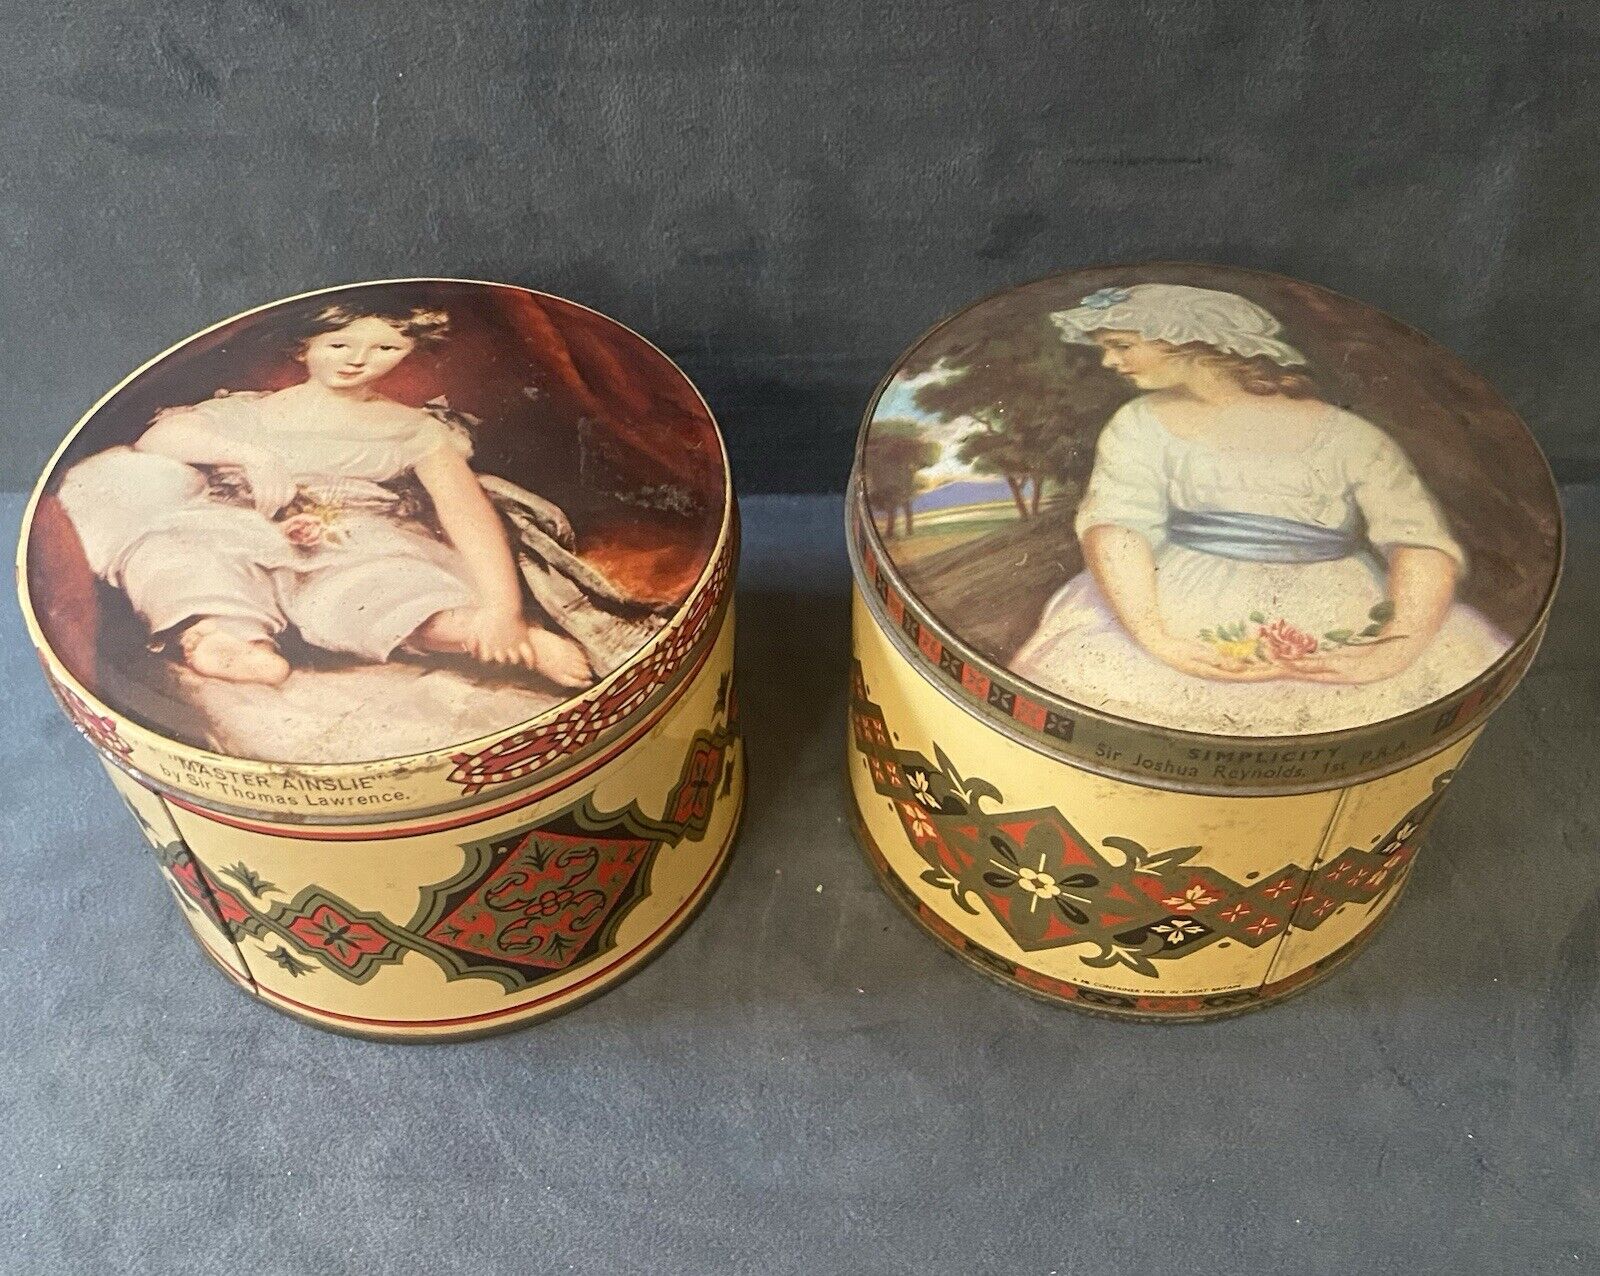 2 Vintage English Confectionery Tins In Vibrant Colors